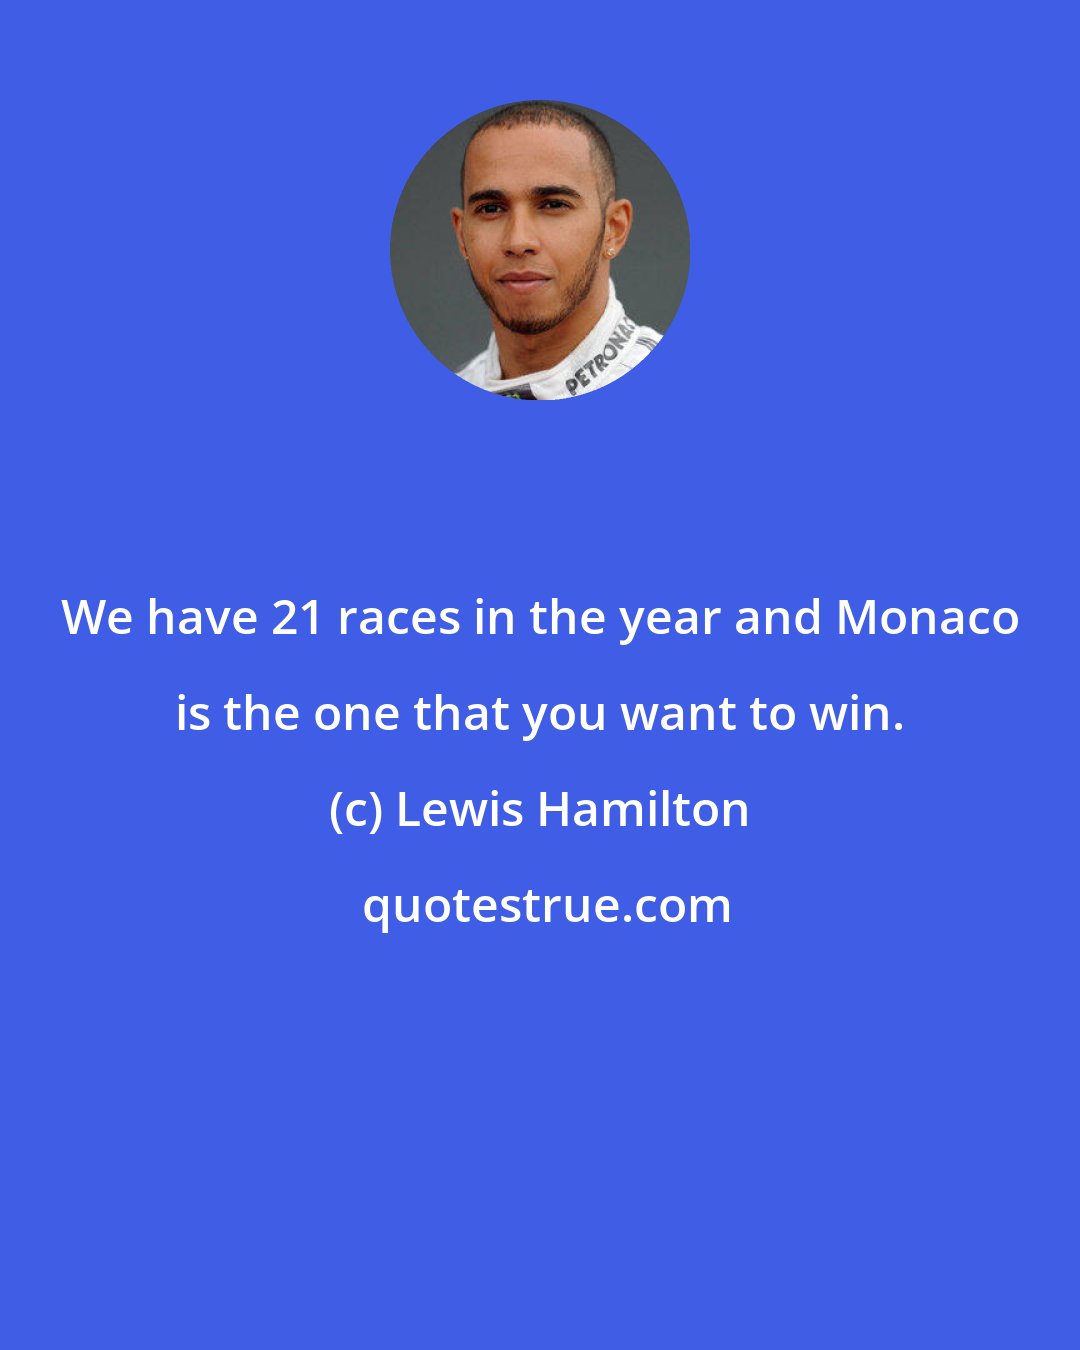 Lewis Hamilton: We have 21 races in the year and Monaco is the one that you want to win.